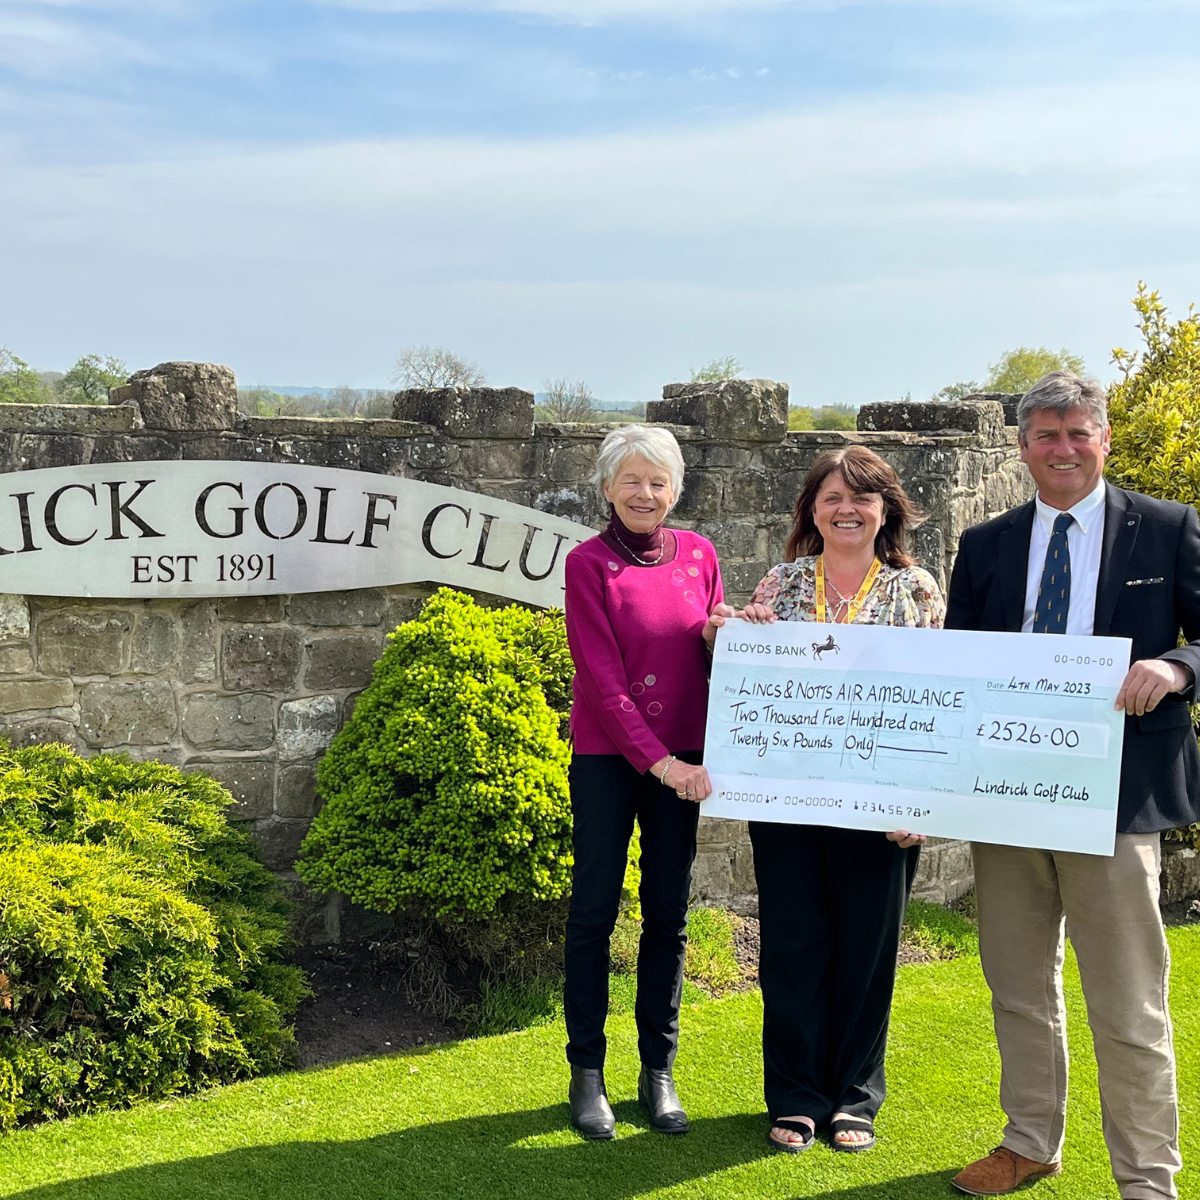 The Lindrick Golf Club presenting a cheque to LNAA